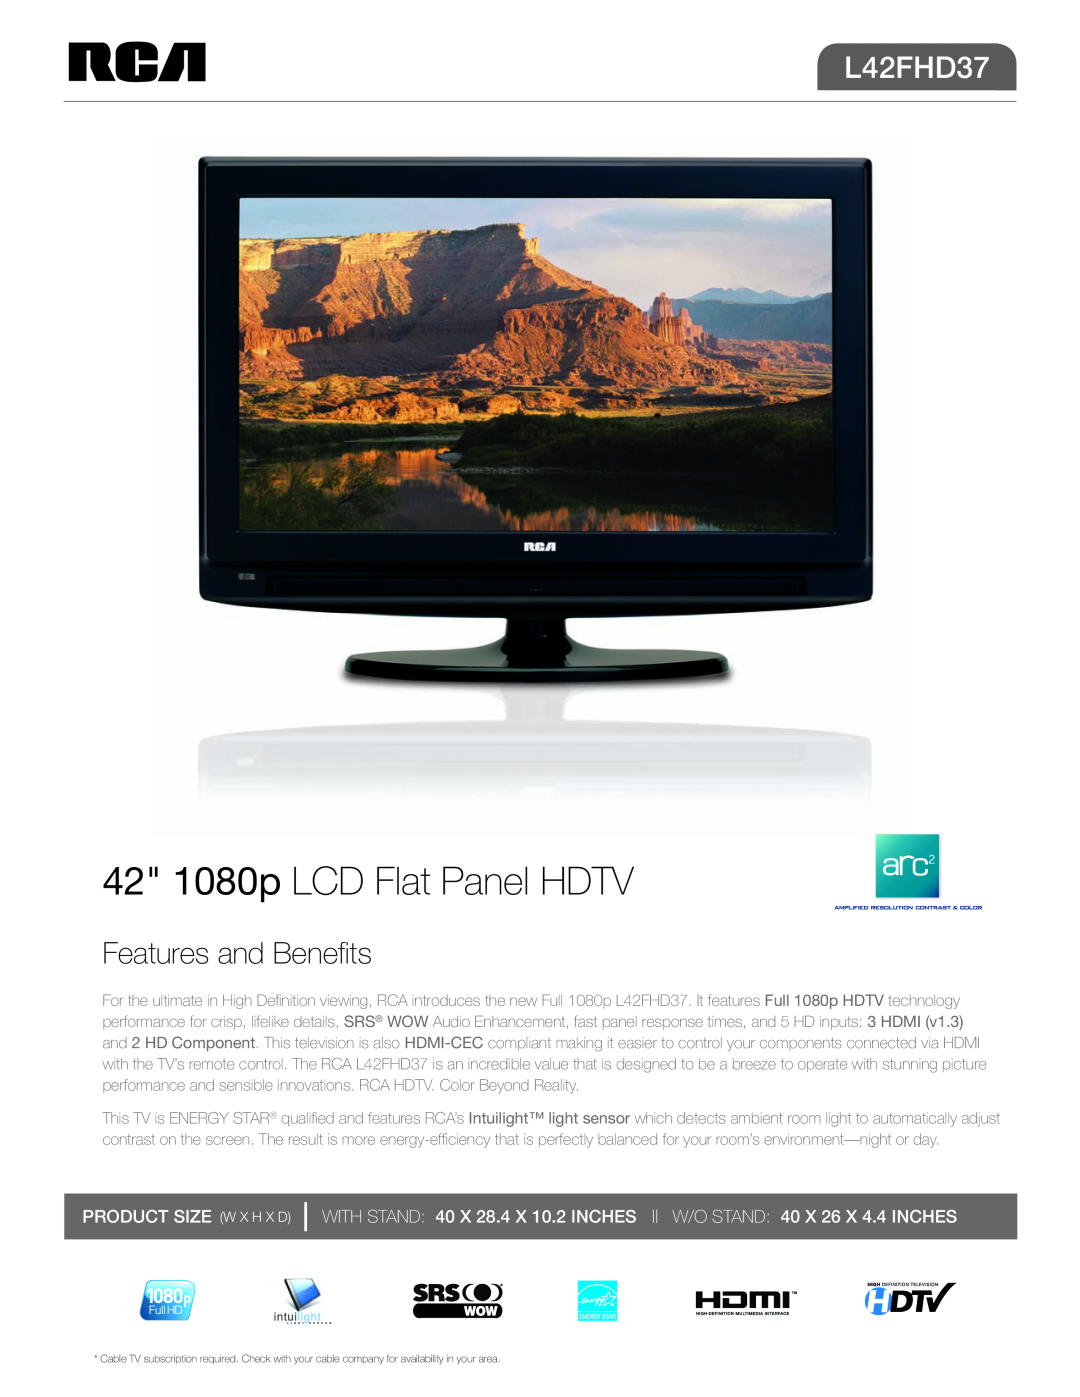 RCA L42FHD37 manual 42 1080p LCD Flat Panel HDTV, Features and Benefits, Product Size W x H x D 